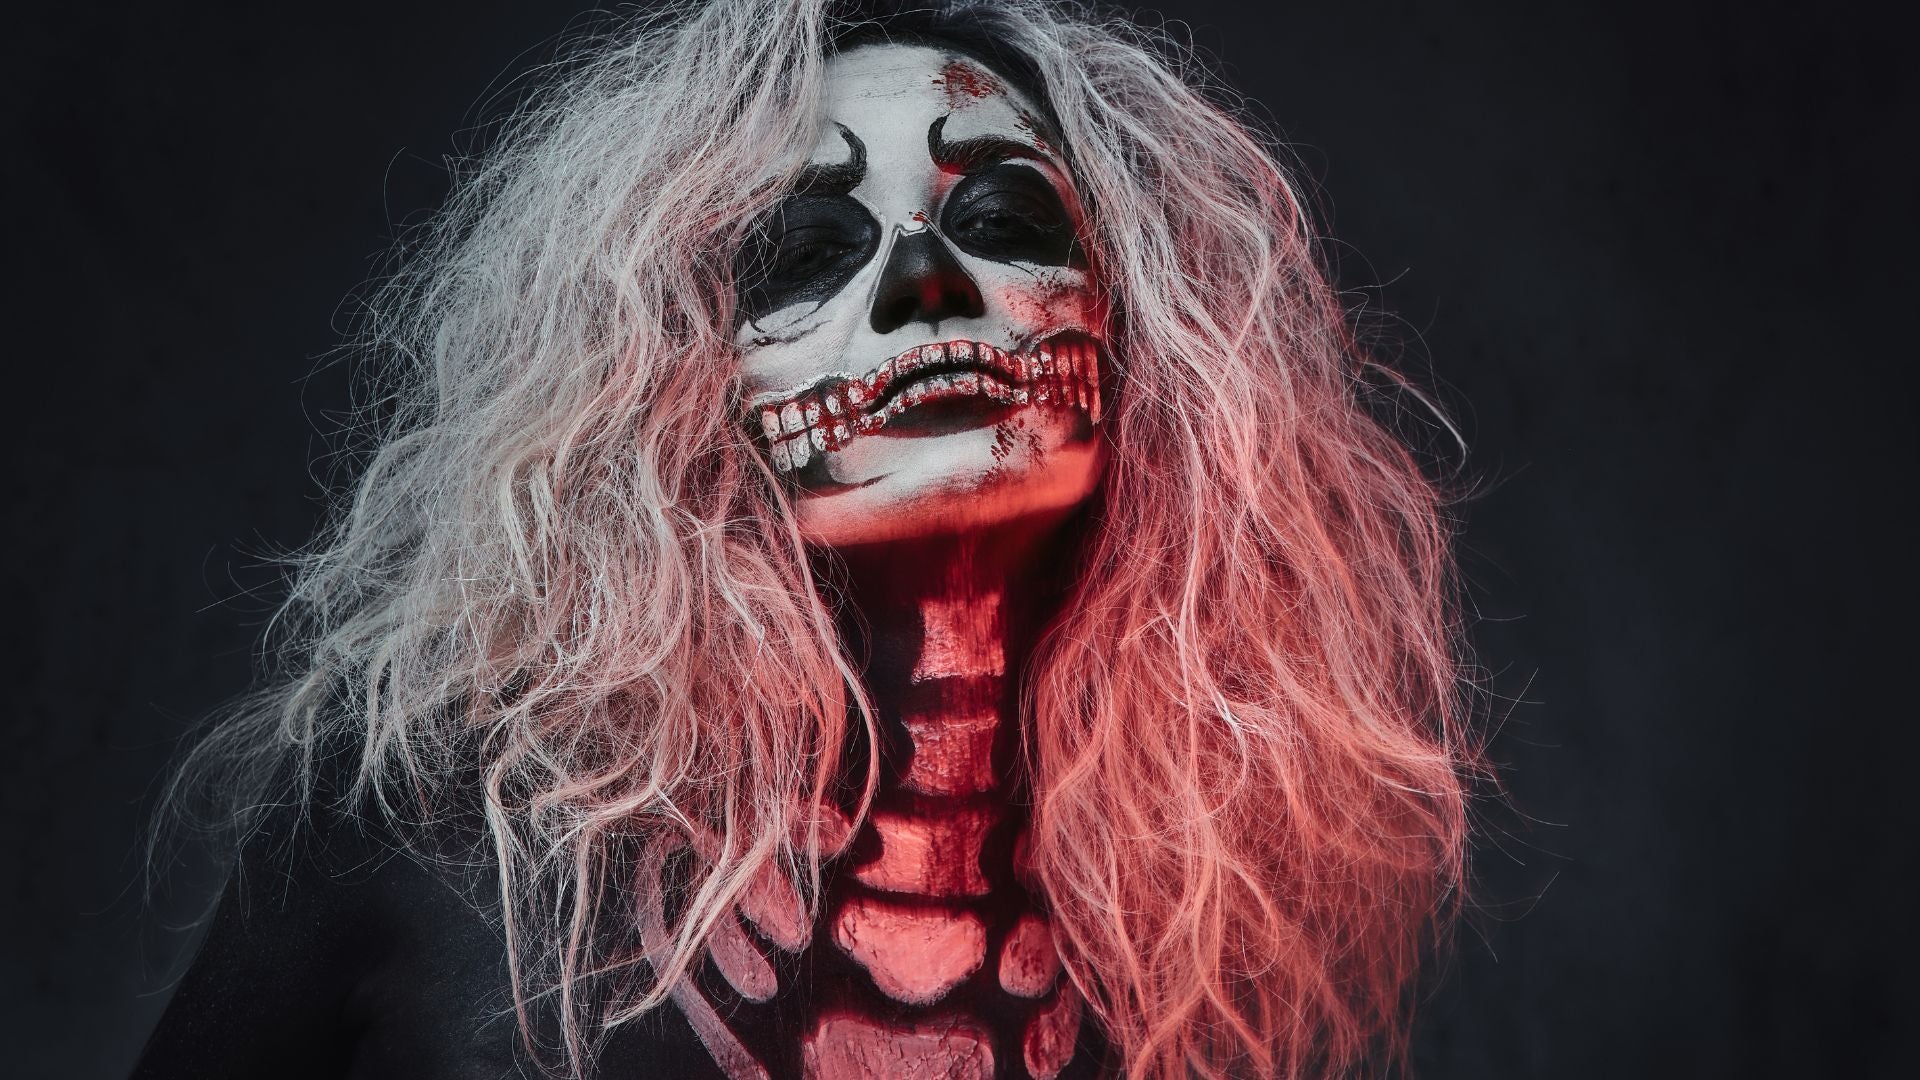 Haunted Hair - The Scariest Things You Can Do to Your Hair